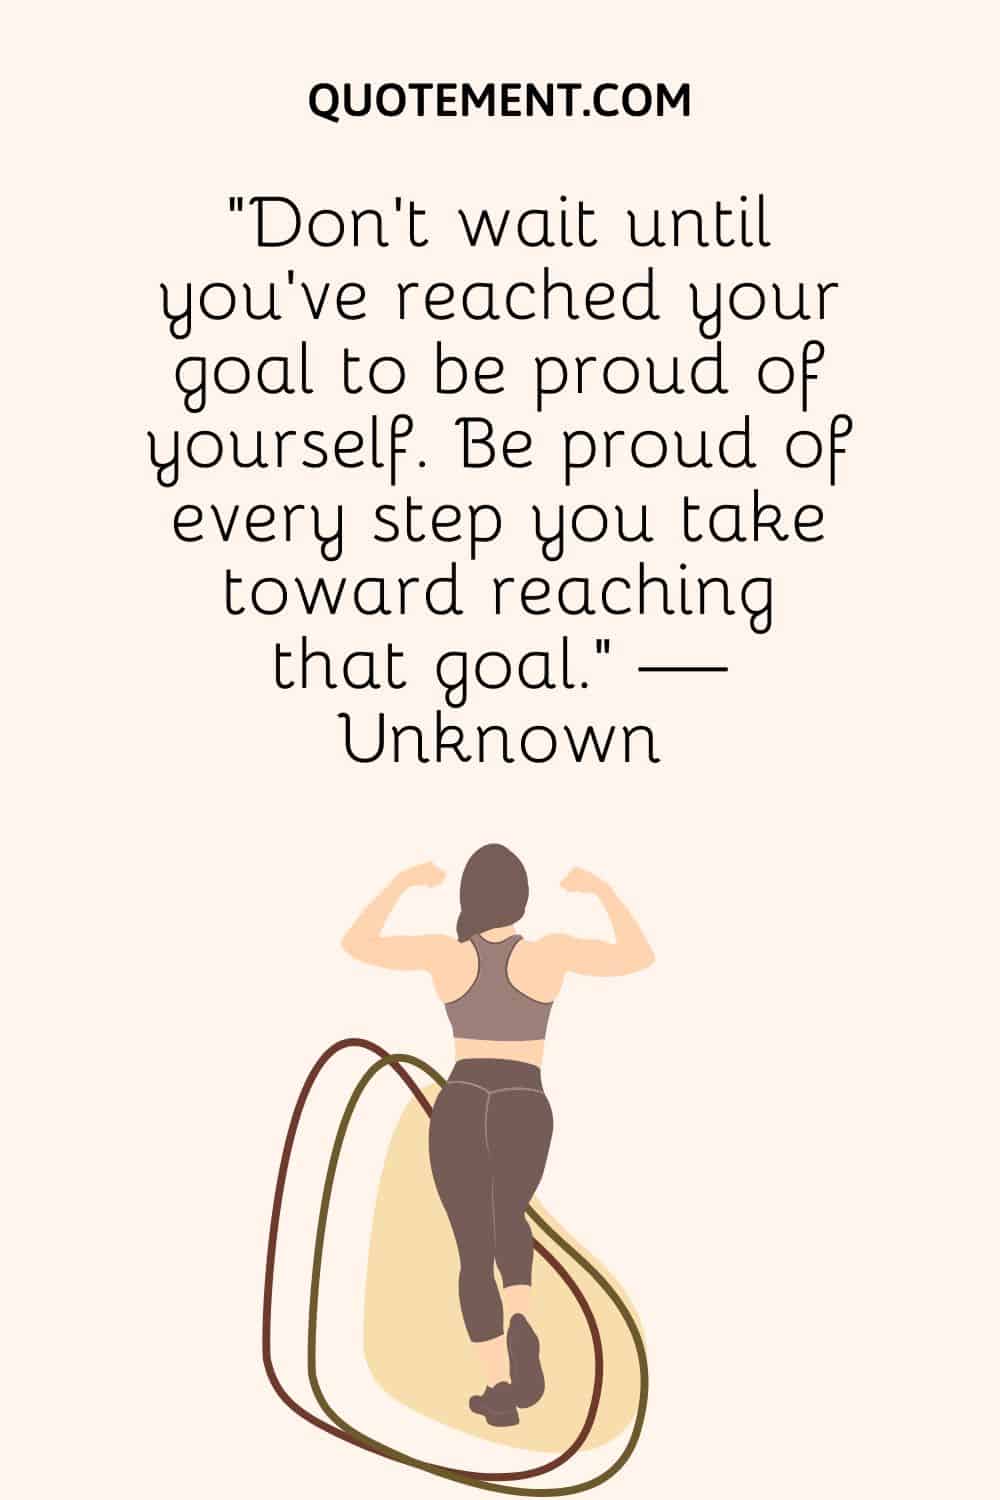 “Don't wait until you've reached your goal to be proud of yourself. Be proud of every step you take toward reaching that goal.” — Unknown